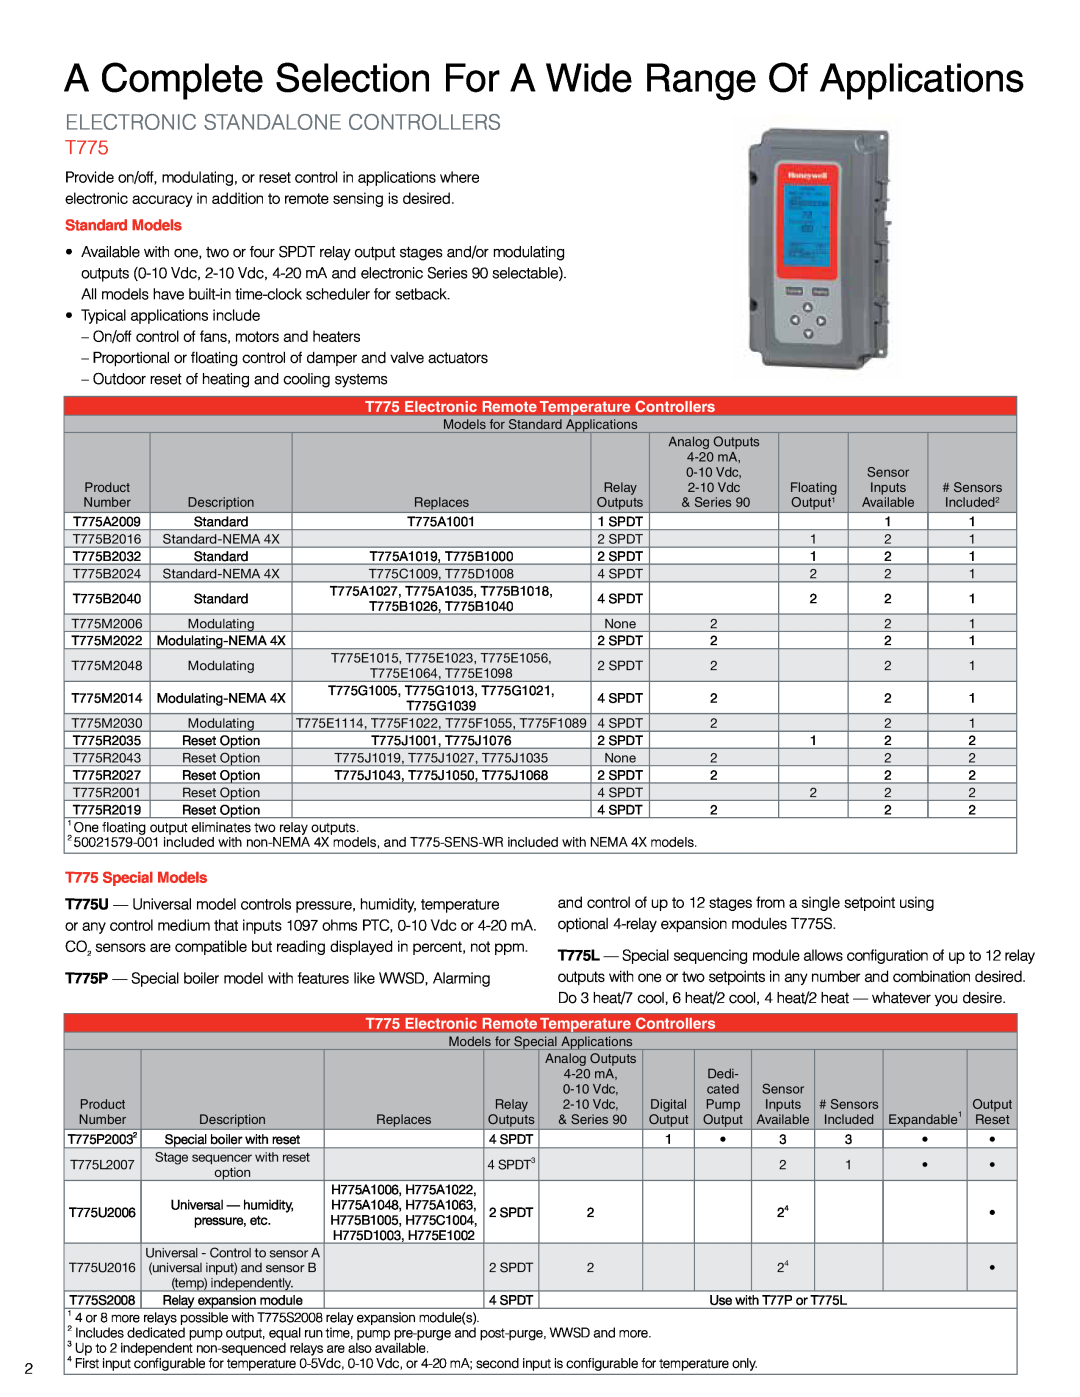 Honeywell T775A2009 manual Electronic Standalone Controllers, A Complete Selection For A Wide Range Of Applications 